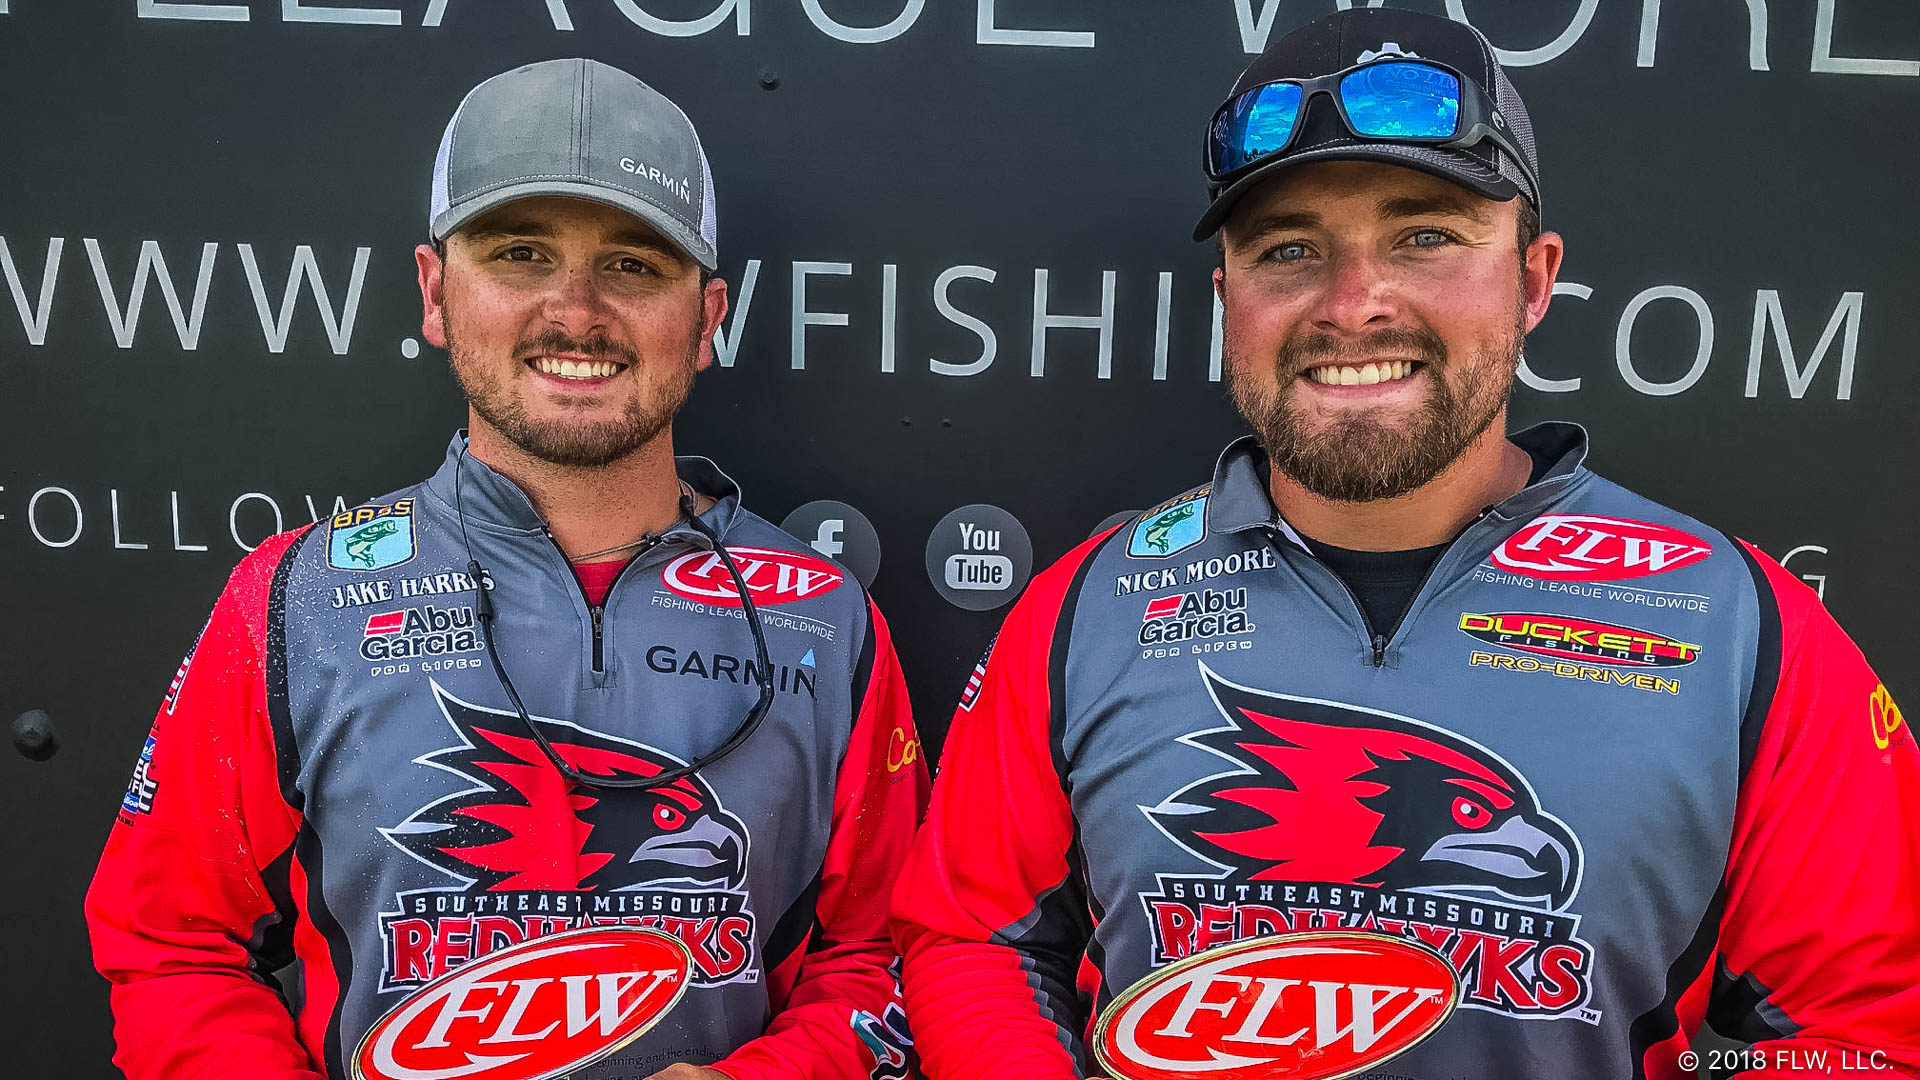 Southeast Missouri State University Wins YETI FLW College Fishing Central  Conference Event on Mississippi River at Wabasha Presented by Costa - Major  League Fishing